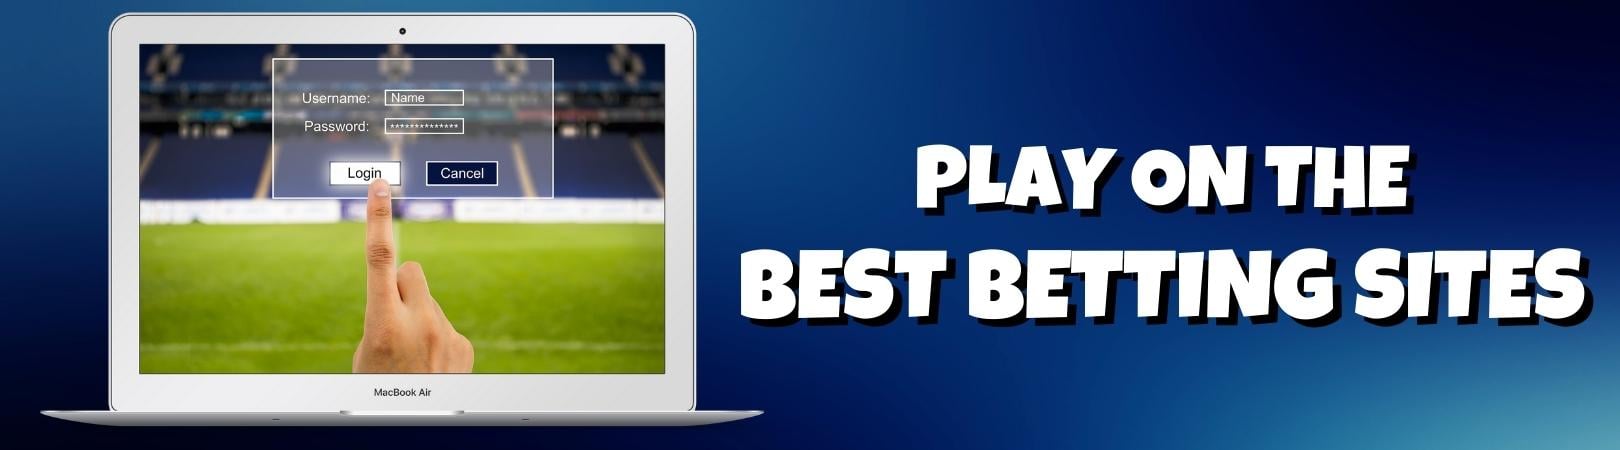 play on the best betting sites img